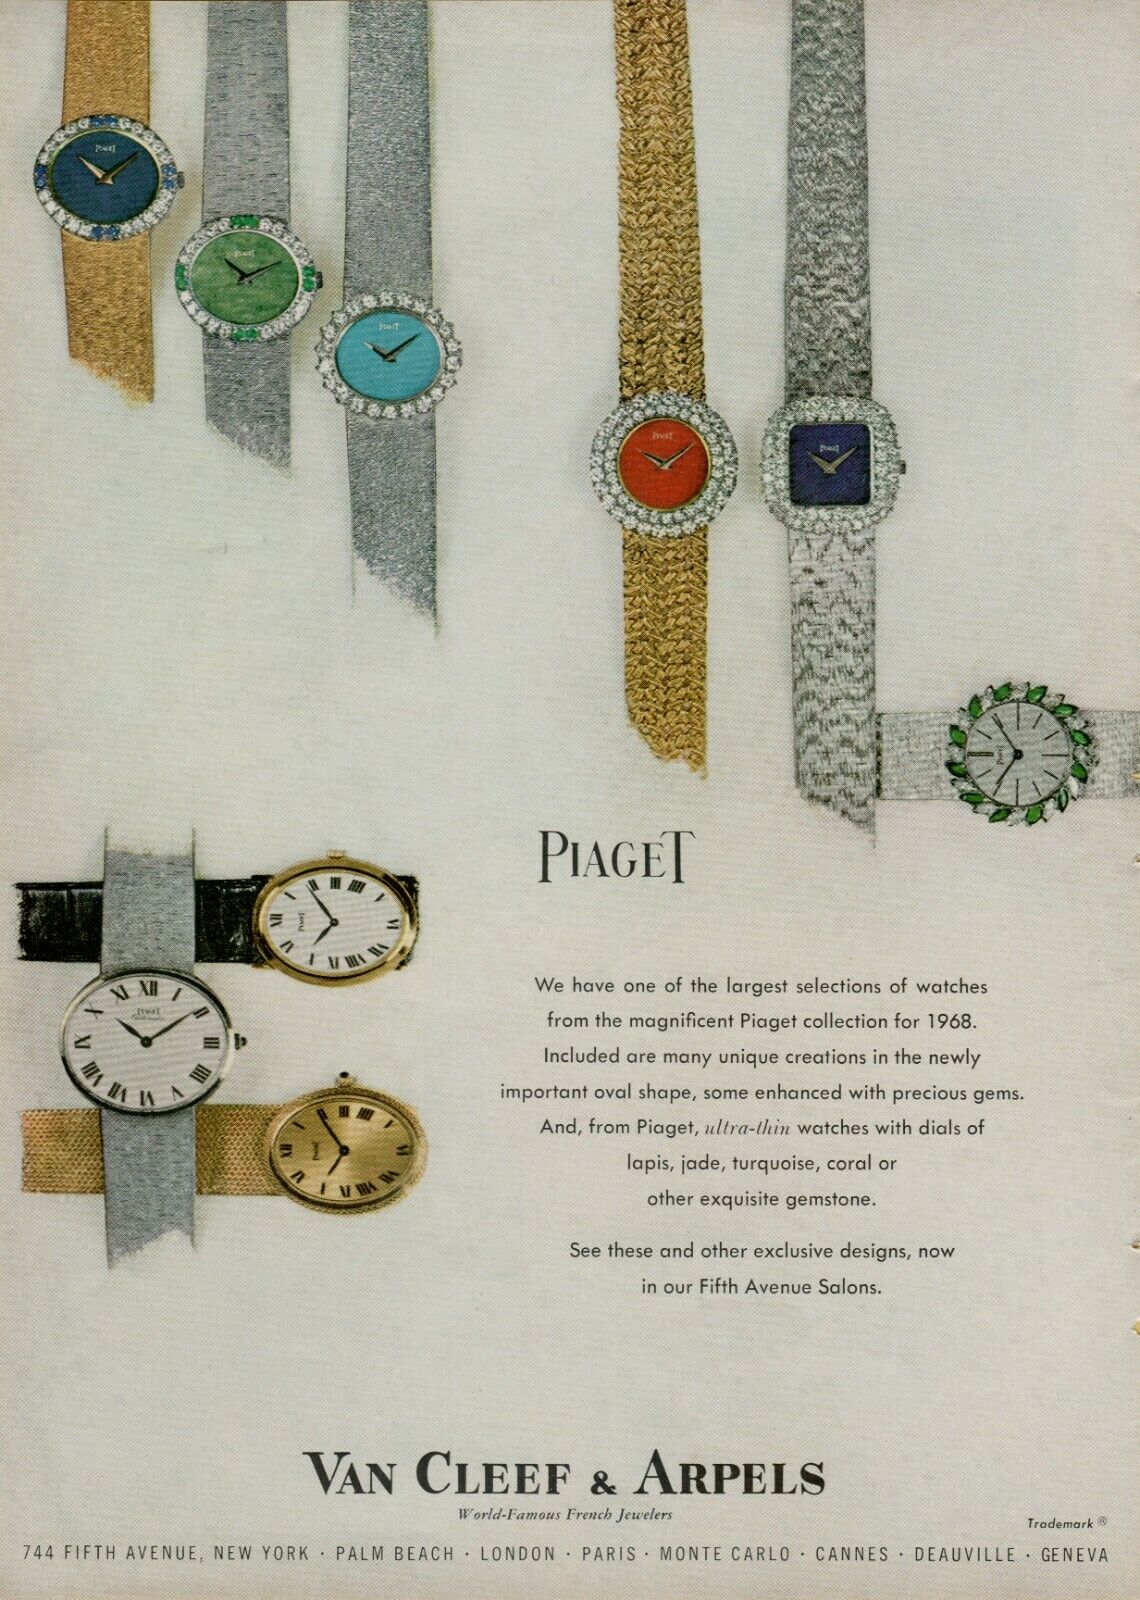 1967 Piaget Ultra-Thin Watches Lapis Jade Turquoise Coral Dials Vintage Print Ad